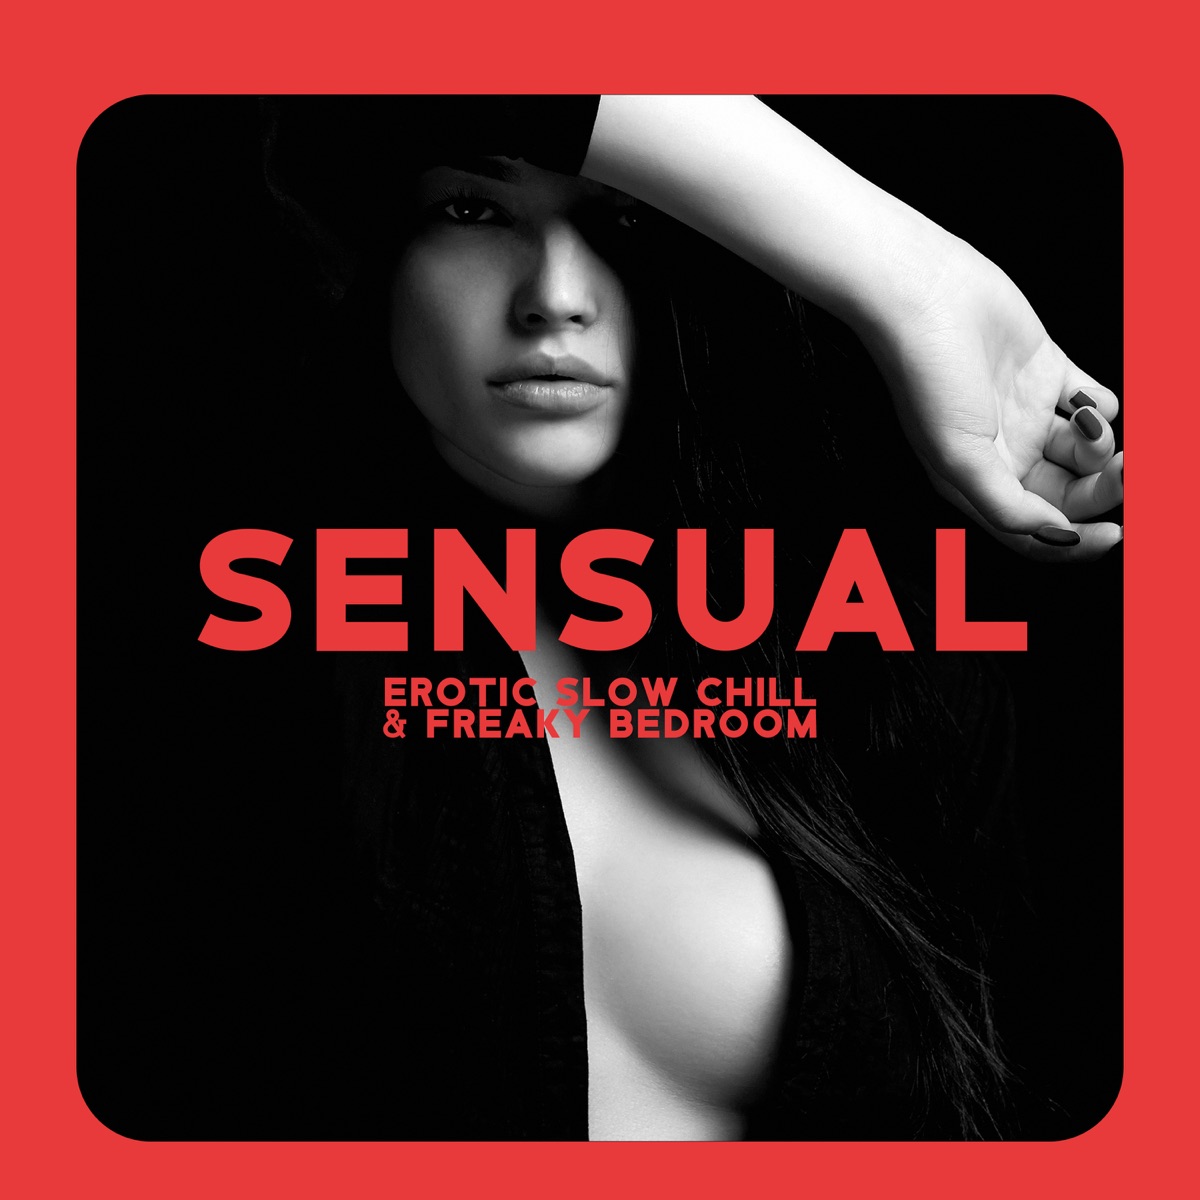 Sensual Erotic Slow Chill and Freaky Bedroom Ibiza Midnight Seduction, Sexual Playlist Music Mix 2022 - Album by Sex Music Zone